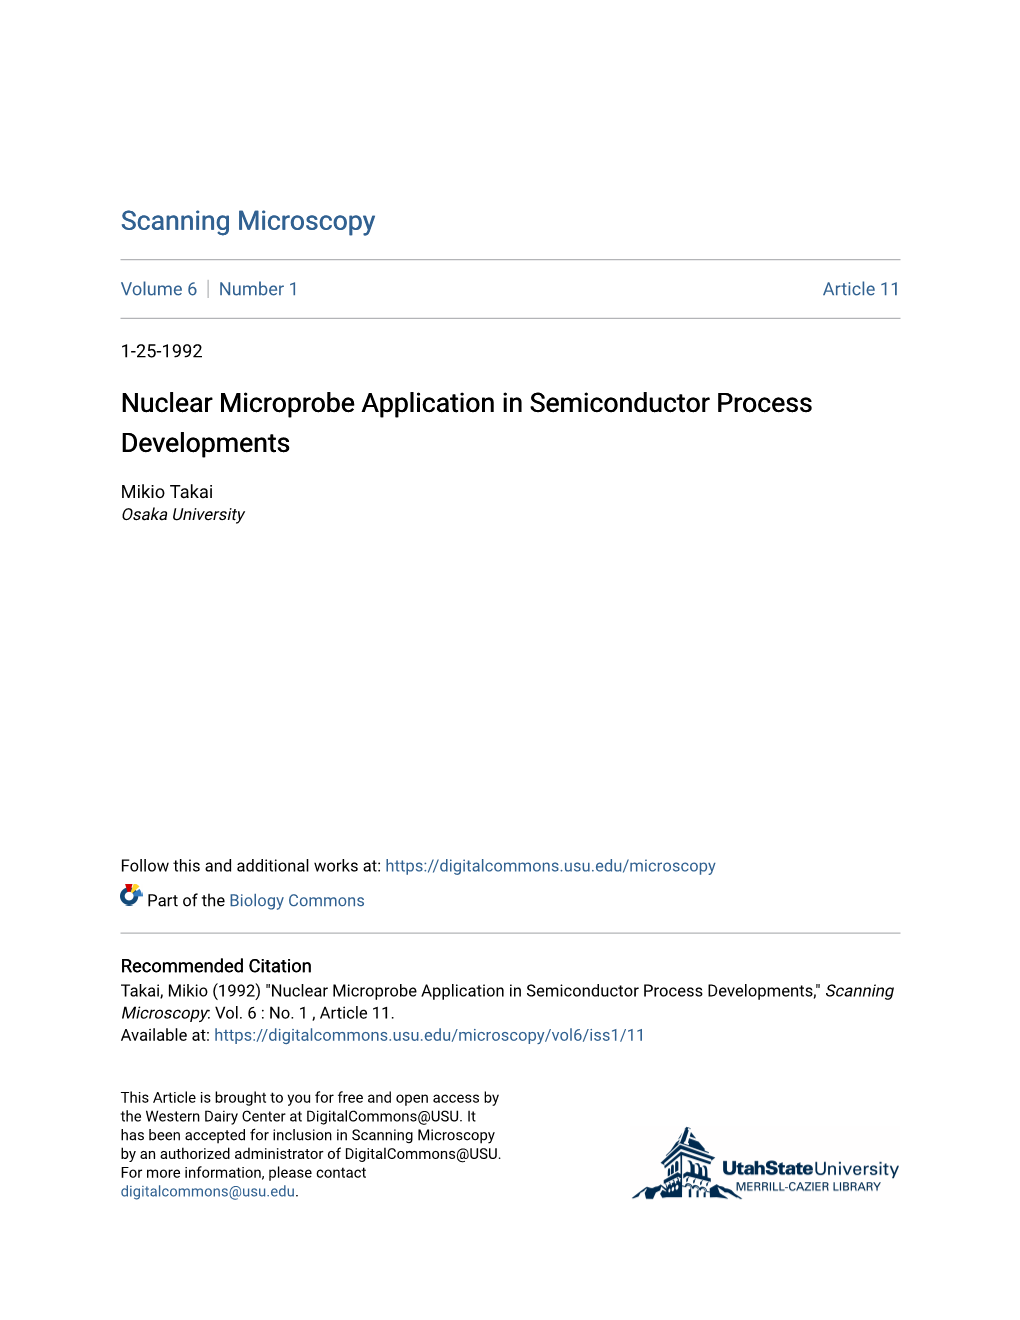 Nuclear Microprobe Application in Semiconductor Process Developments